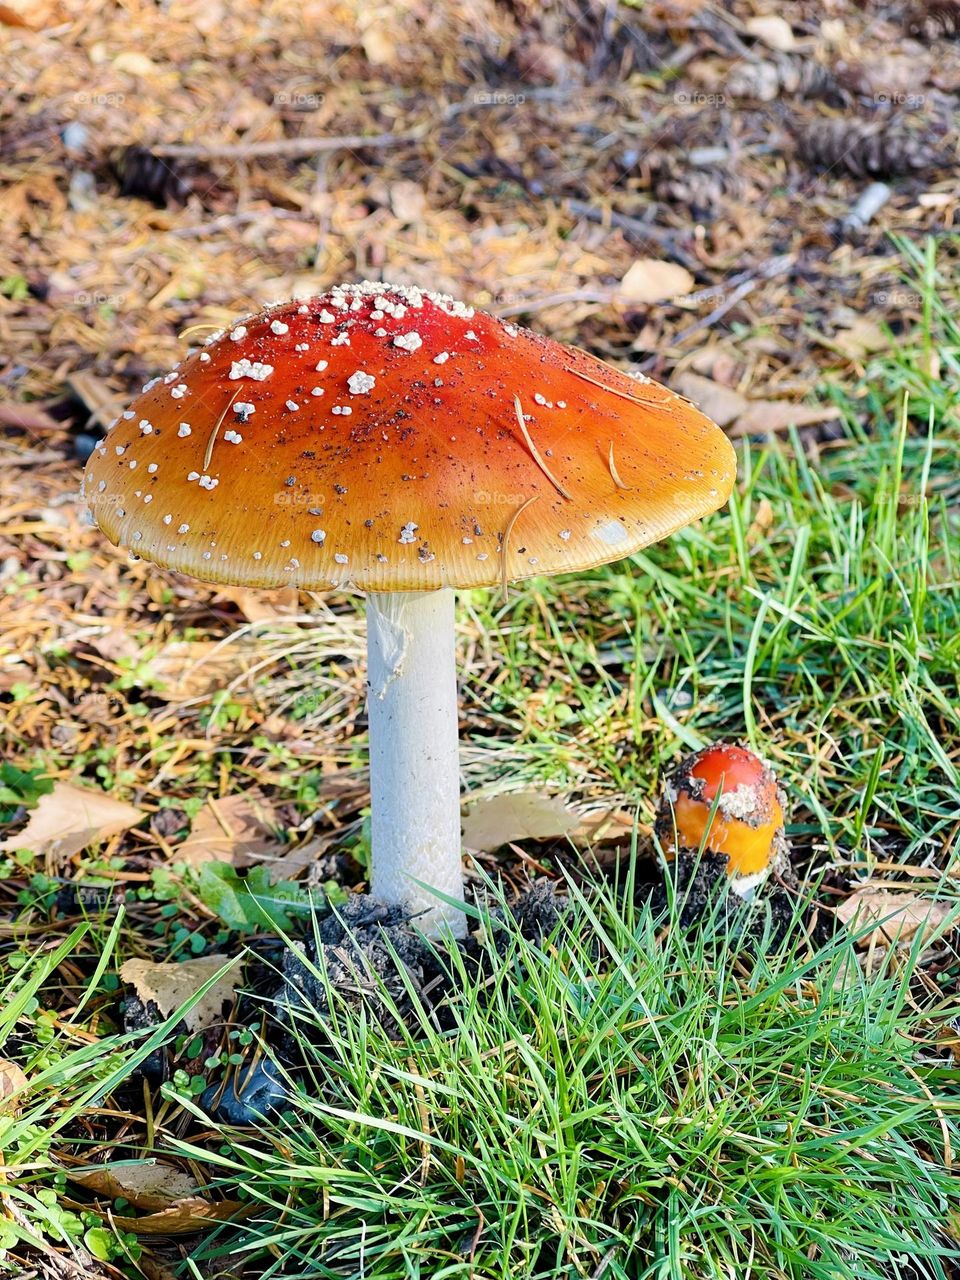 Red mushroom in the forest 